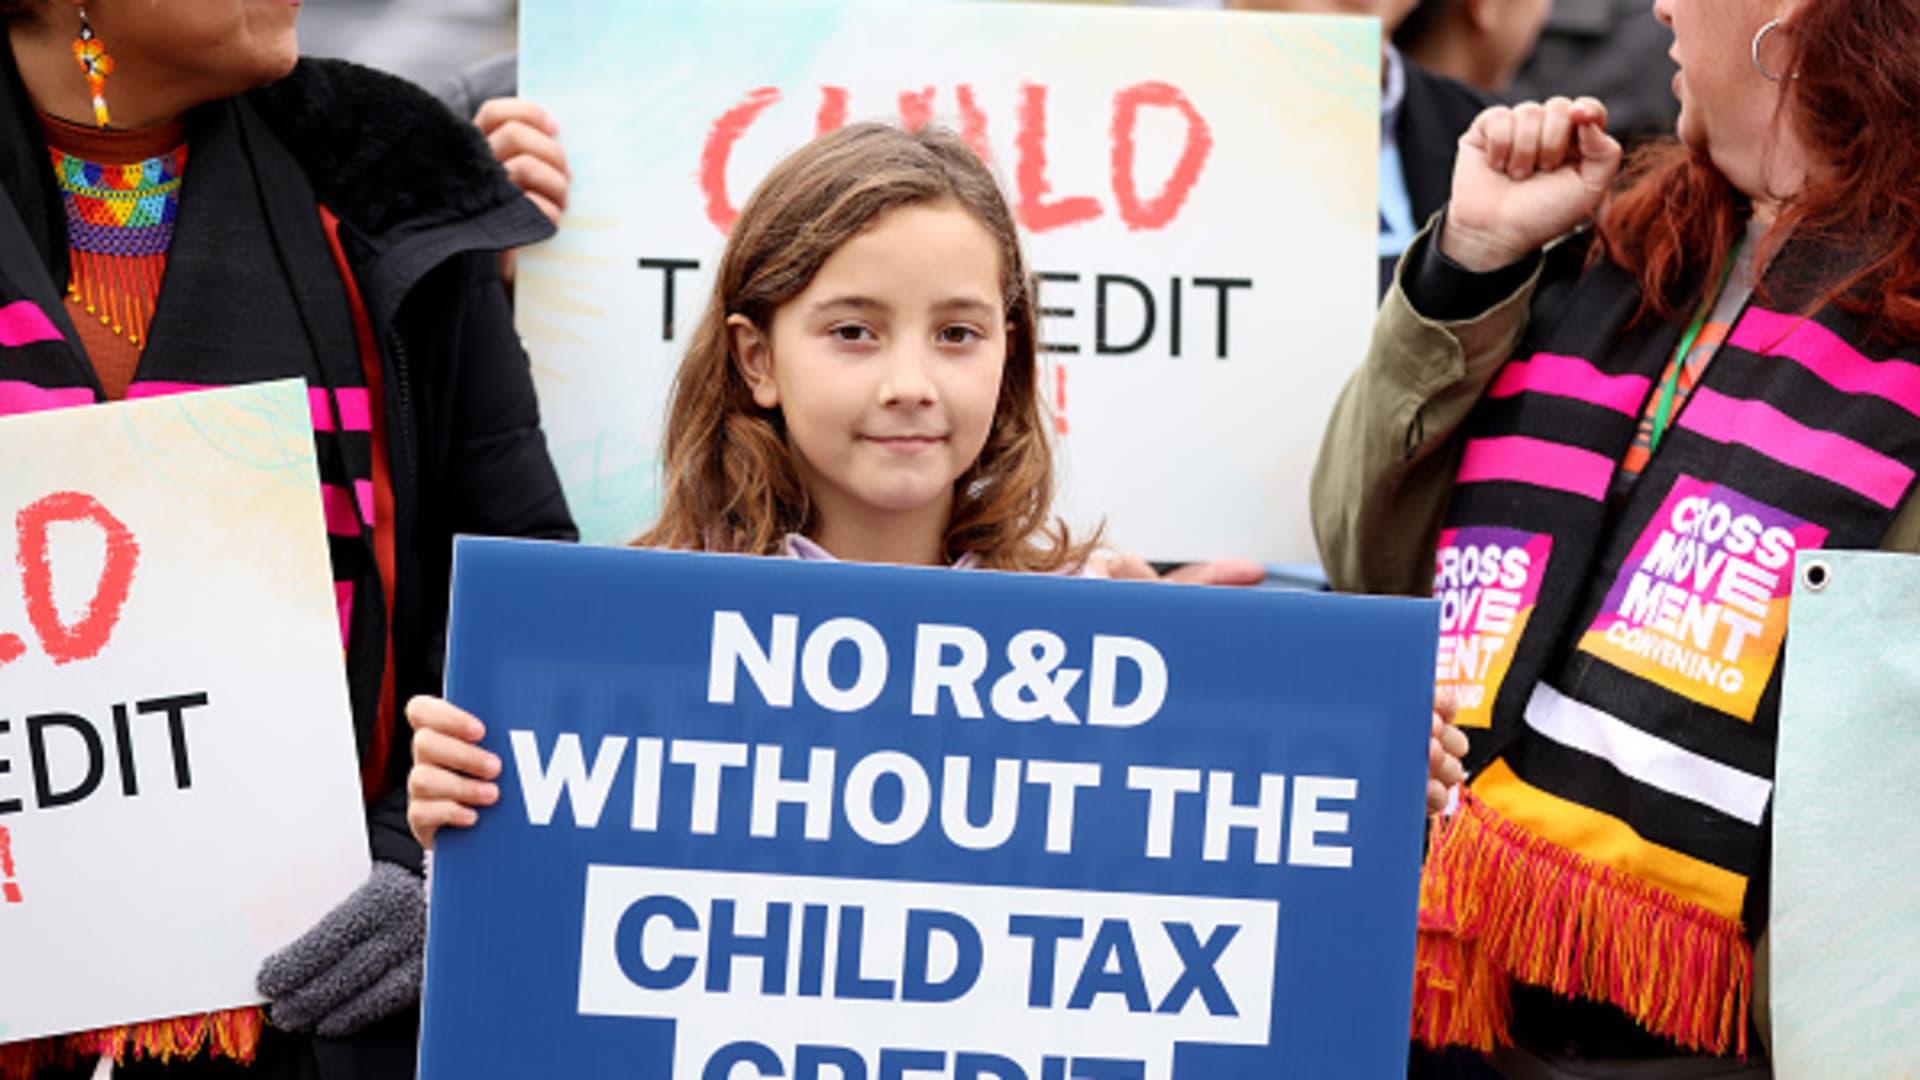 Congress may revisit the expanded child tax credit in the lame duck session. But terms may not be as generous as in 2021